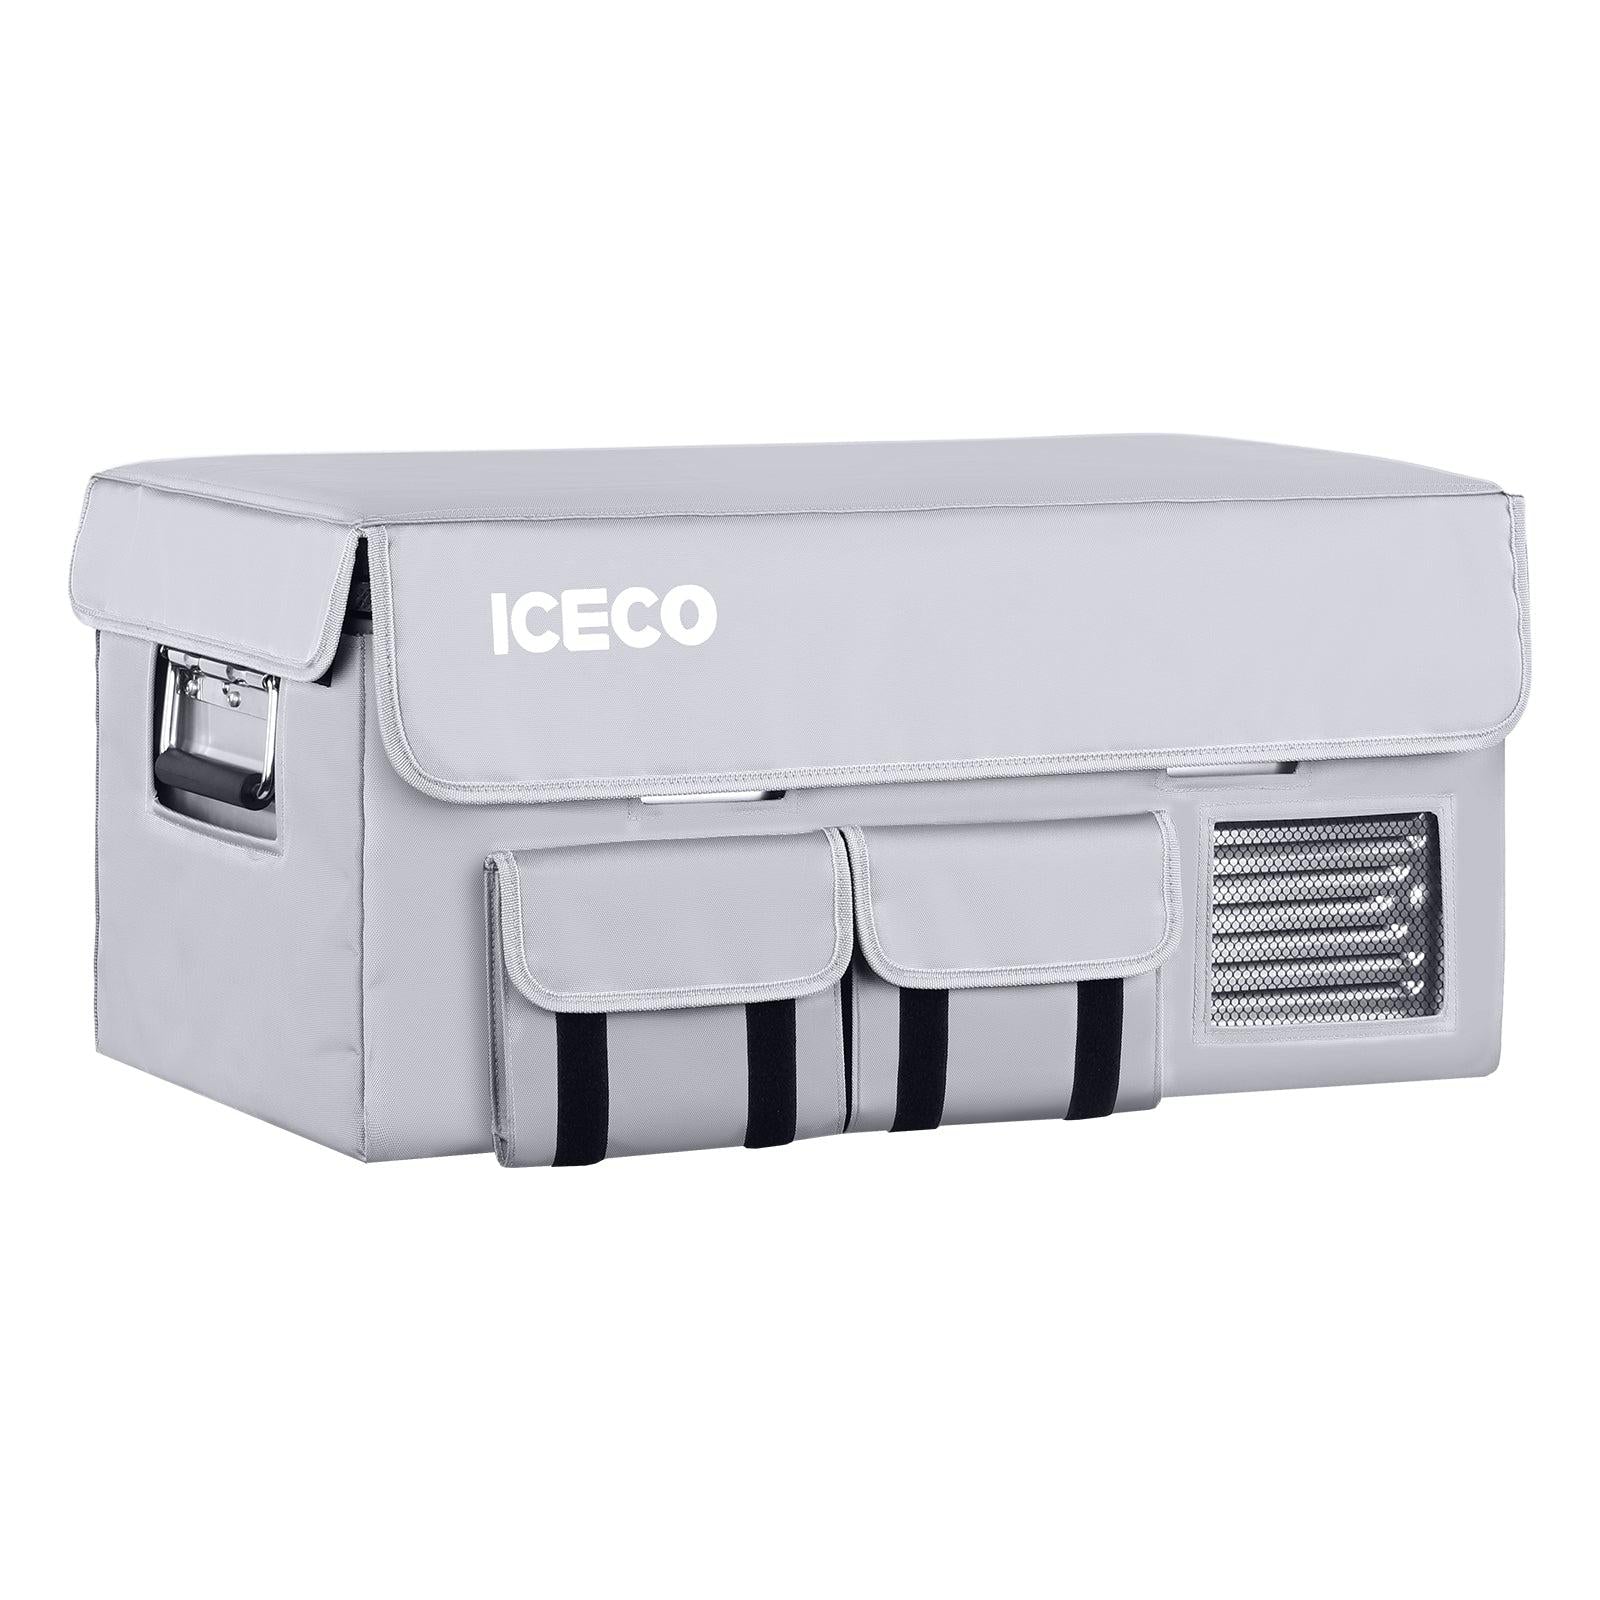 APL20 Insulated Protective Cover | ICECO-Insulated Cover-www.icecofreezer.com